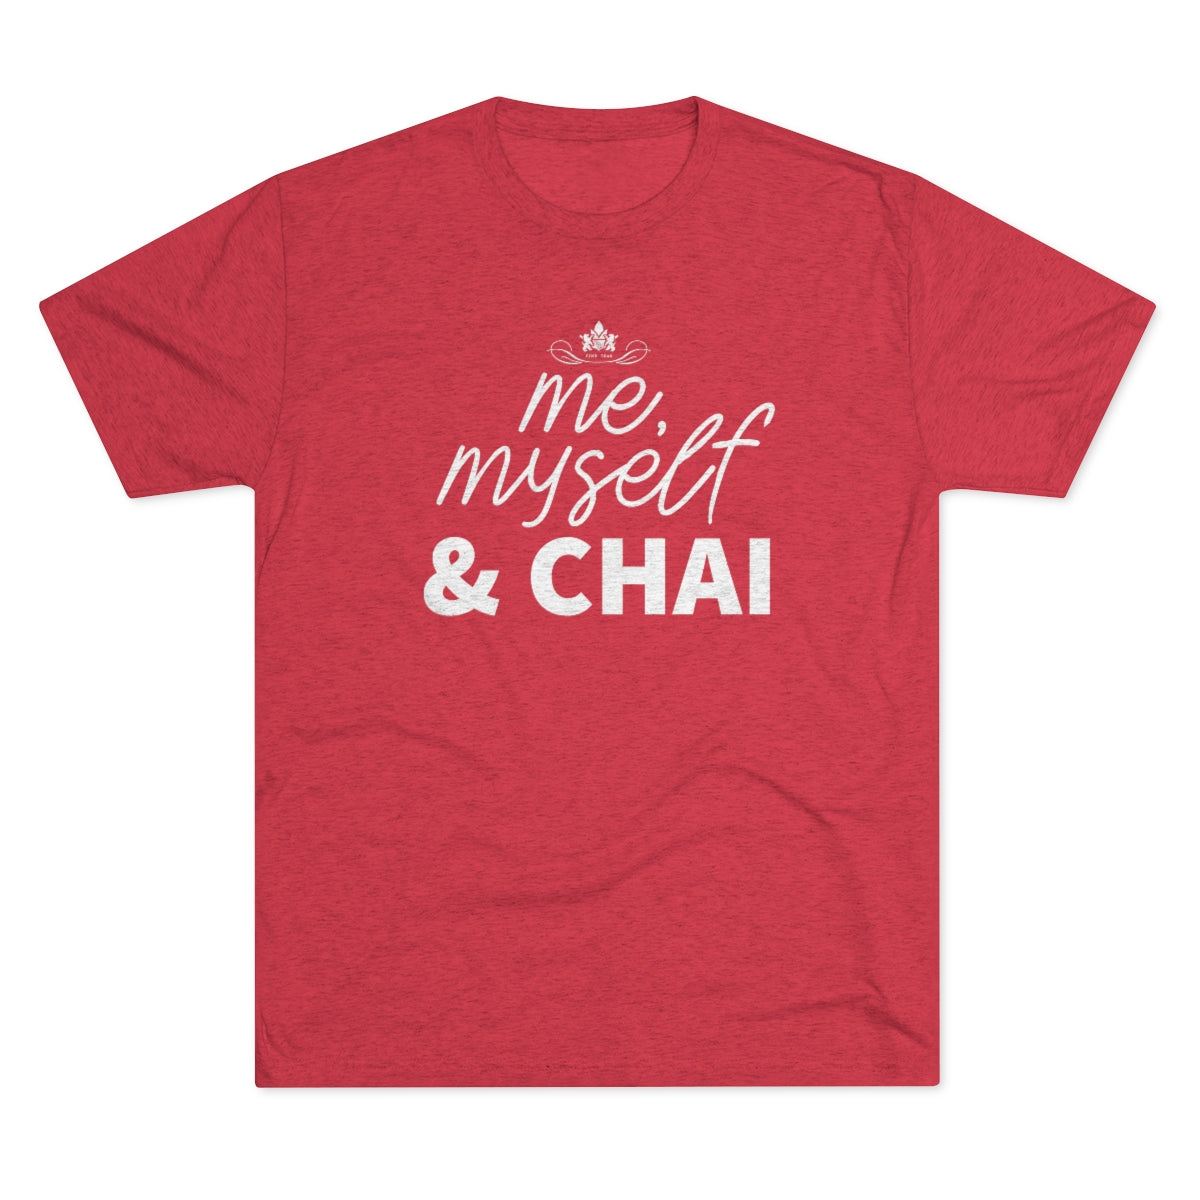 Me, Myself & Chai Graphic Tee - Tri-Blend Vintage Red S - Harney & Sons Fine Teas